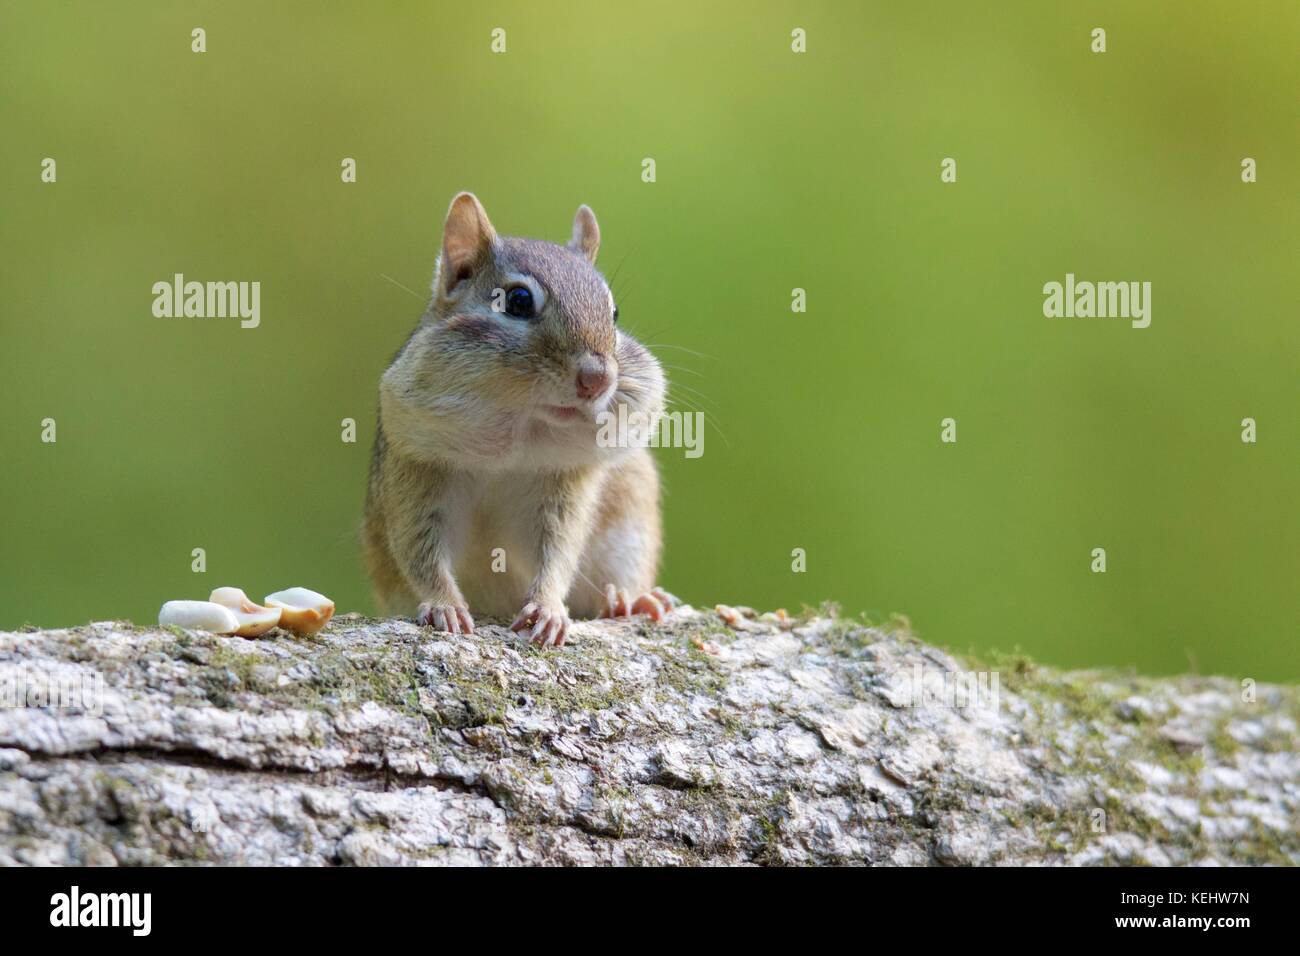 Chipmunk Full Cheeks High Resolution Stock Photography and Images - Alamy